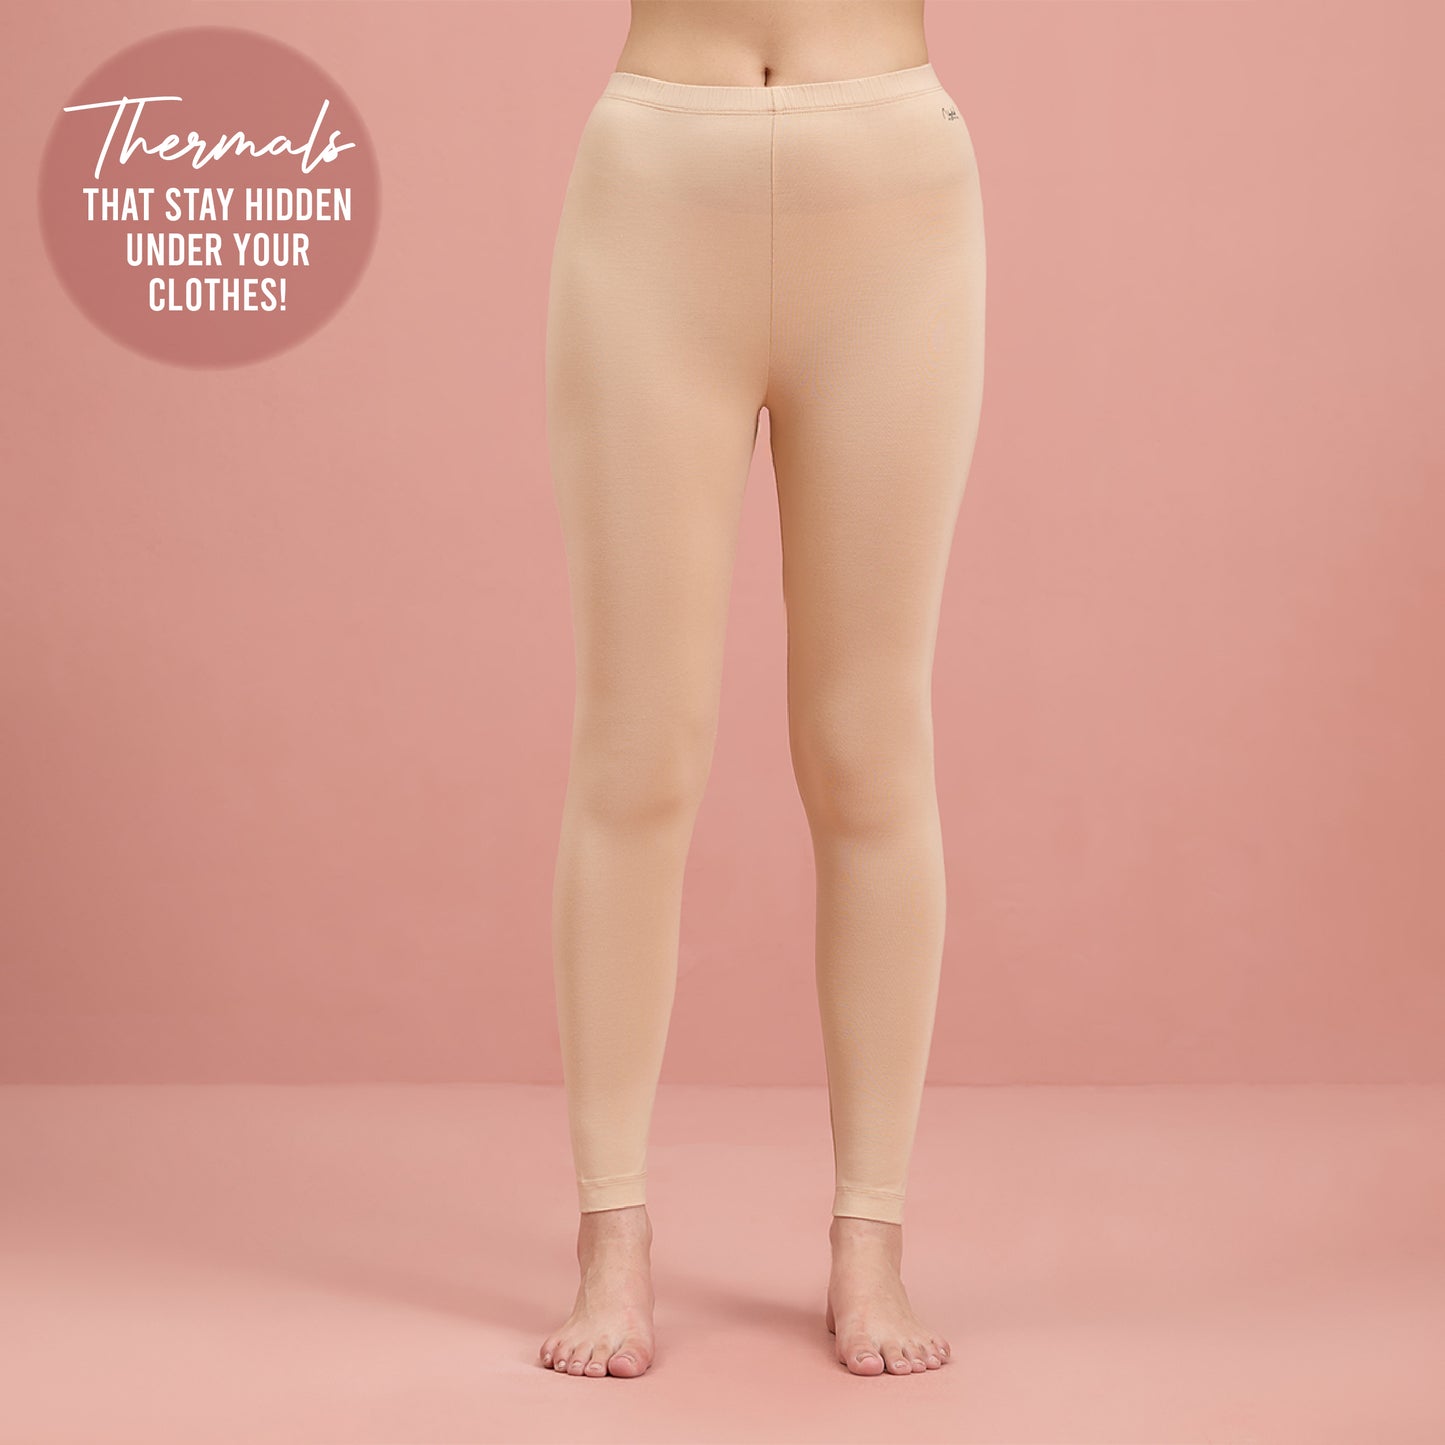 Ultra Light and Soft Thermal Leggings that stay hidden under clothes - NYOE06 Nude